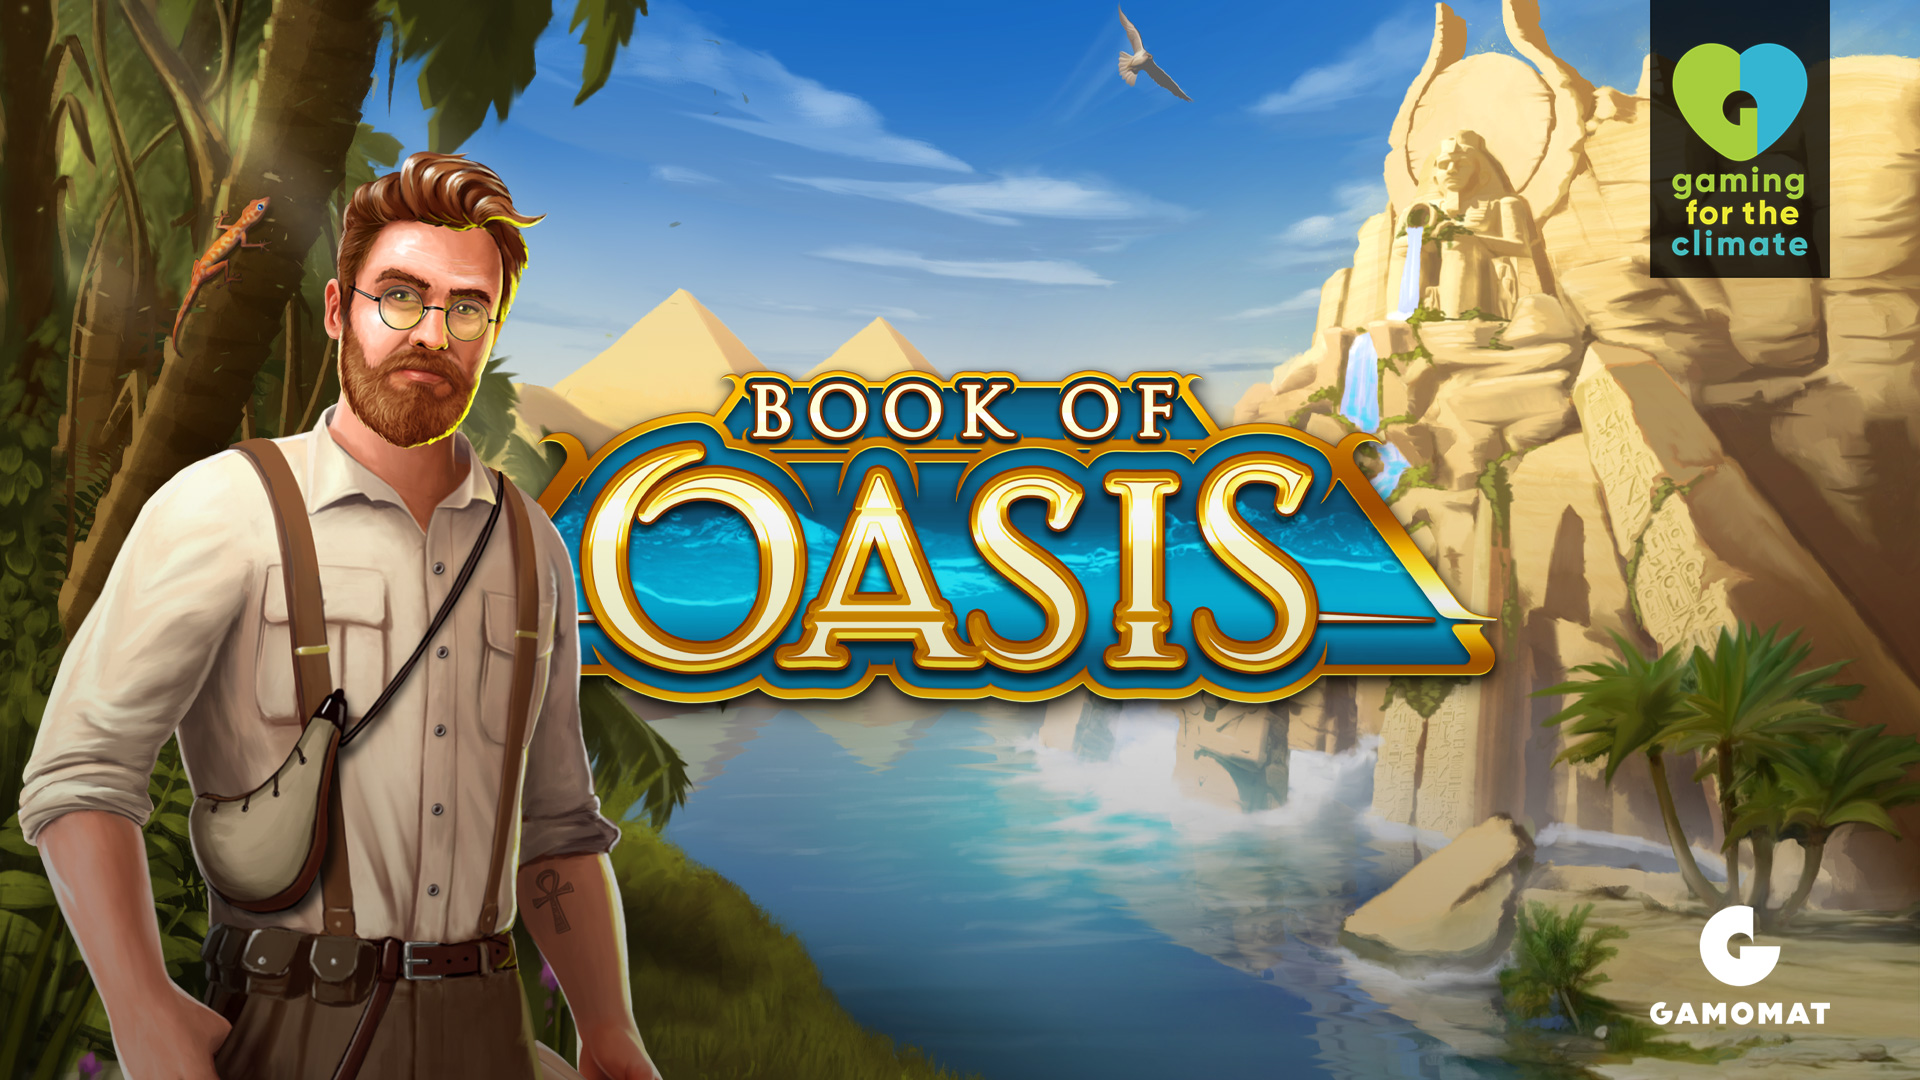 GAMOMAT releases Book of Oasis slot